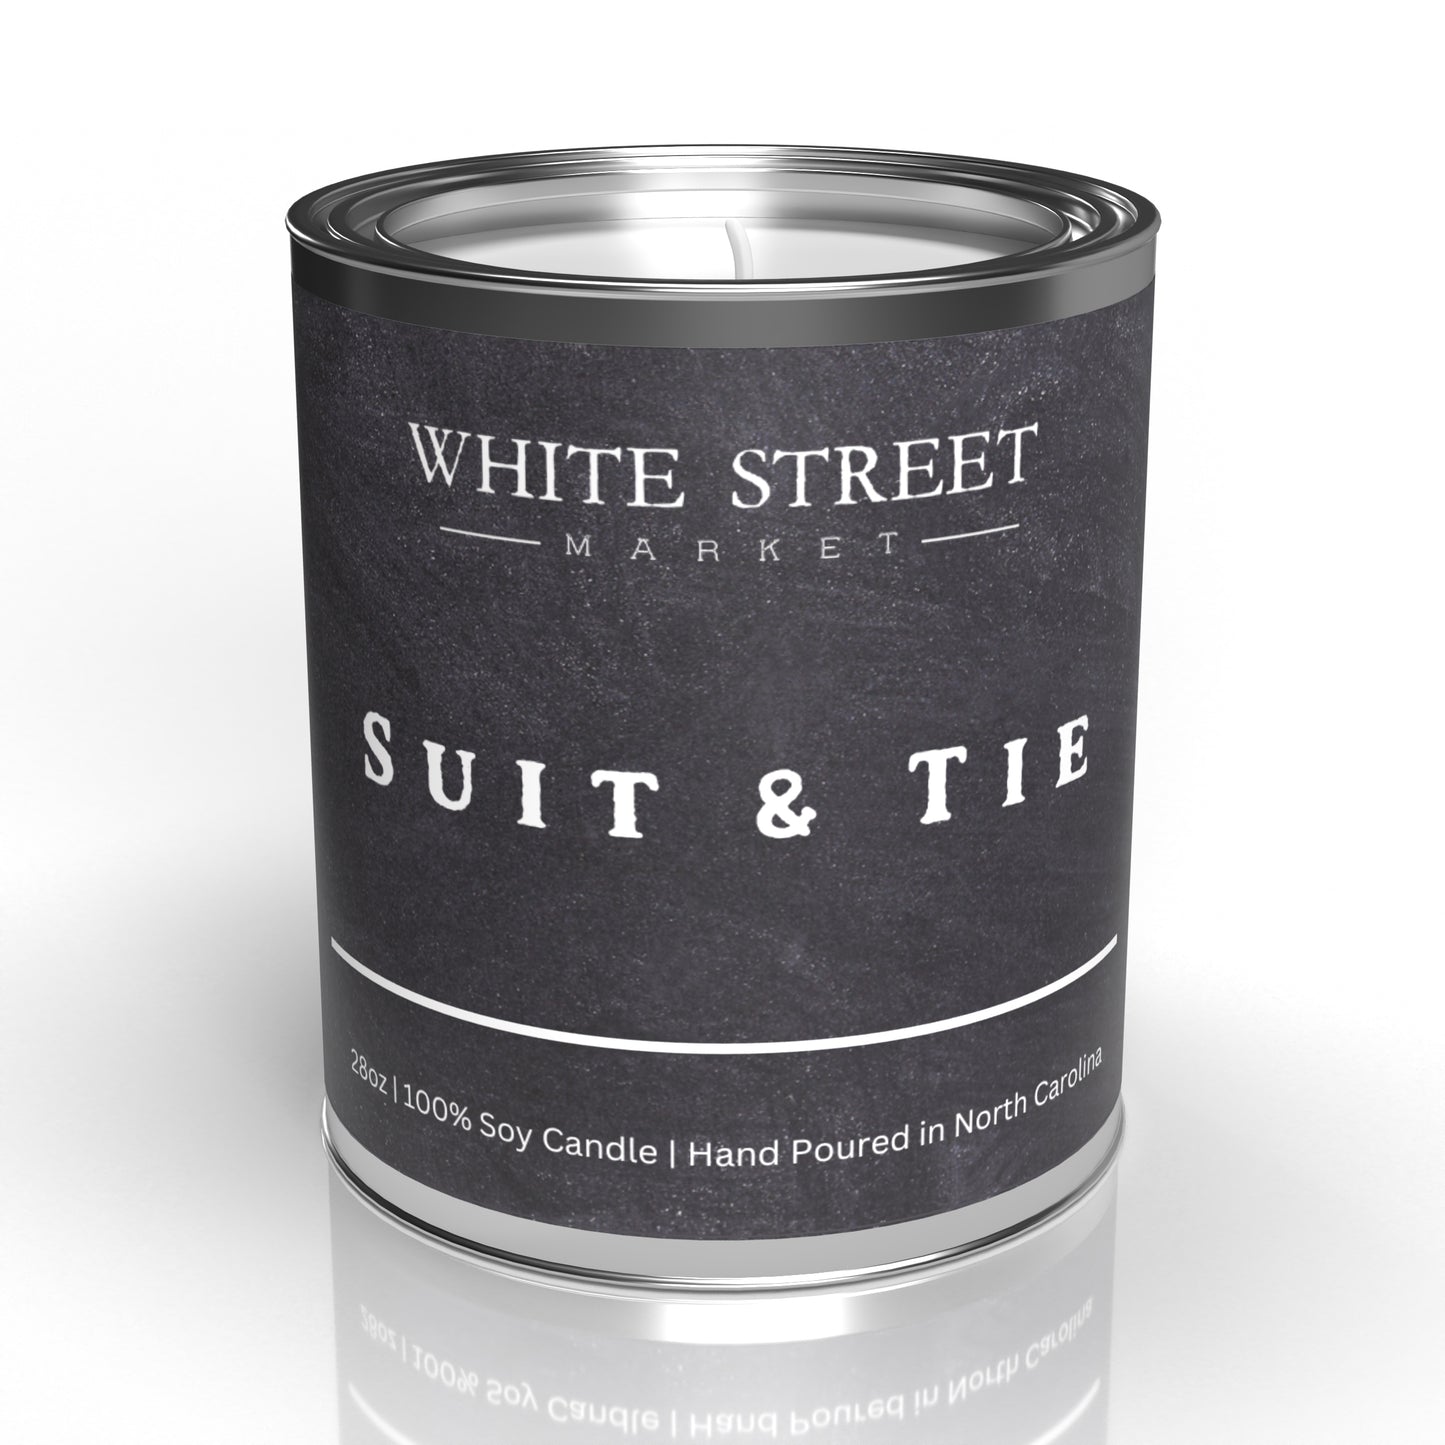 Suit & Tie Candle - White Street Market